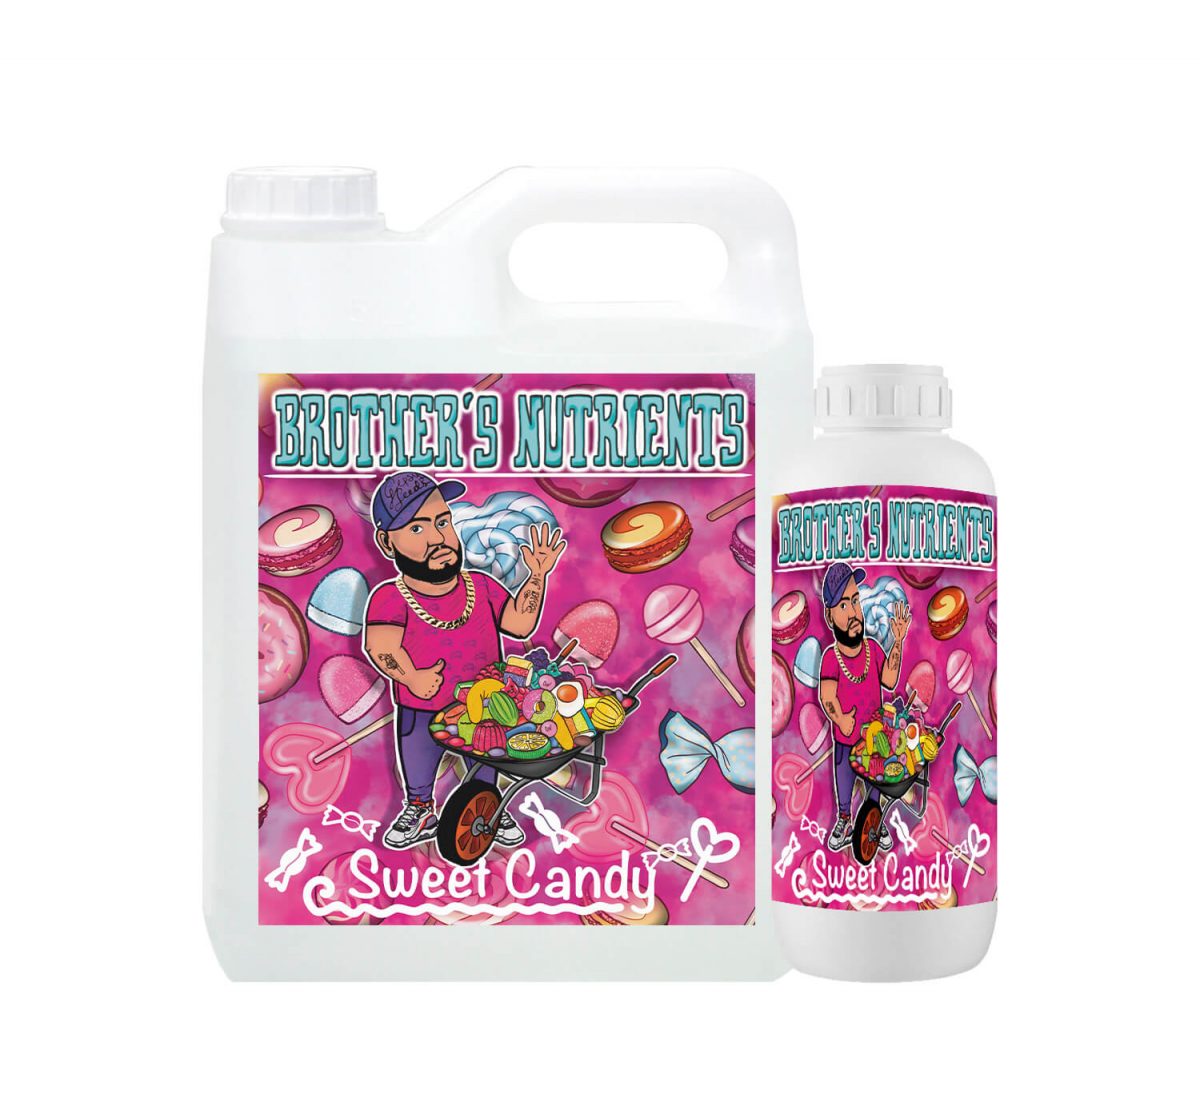 sweet-camdy-maximo-sabor-1l-y-5l-Brothers-Nutrients-2022